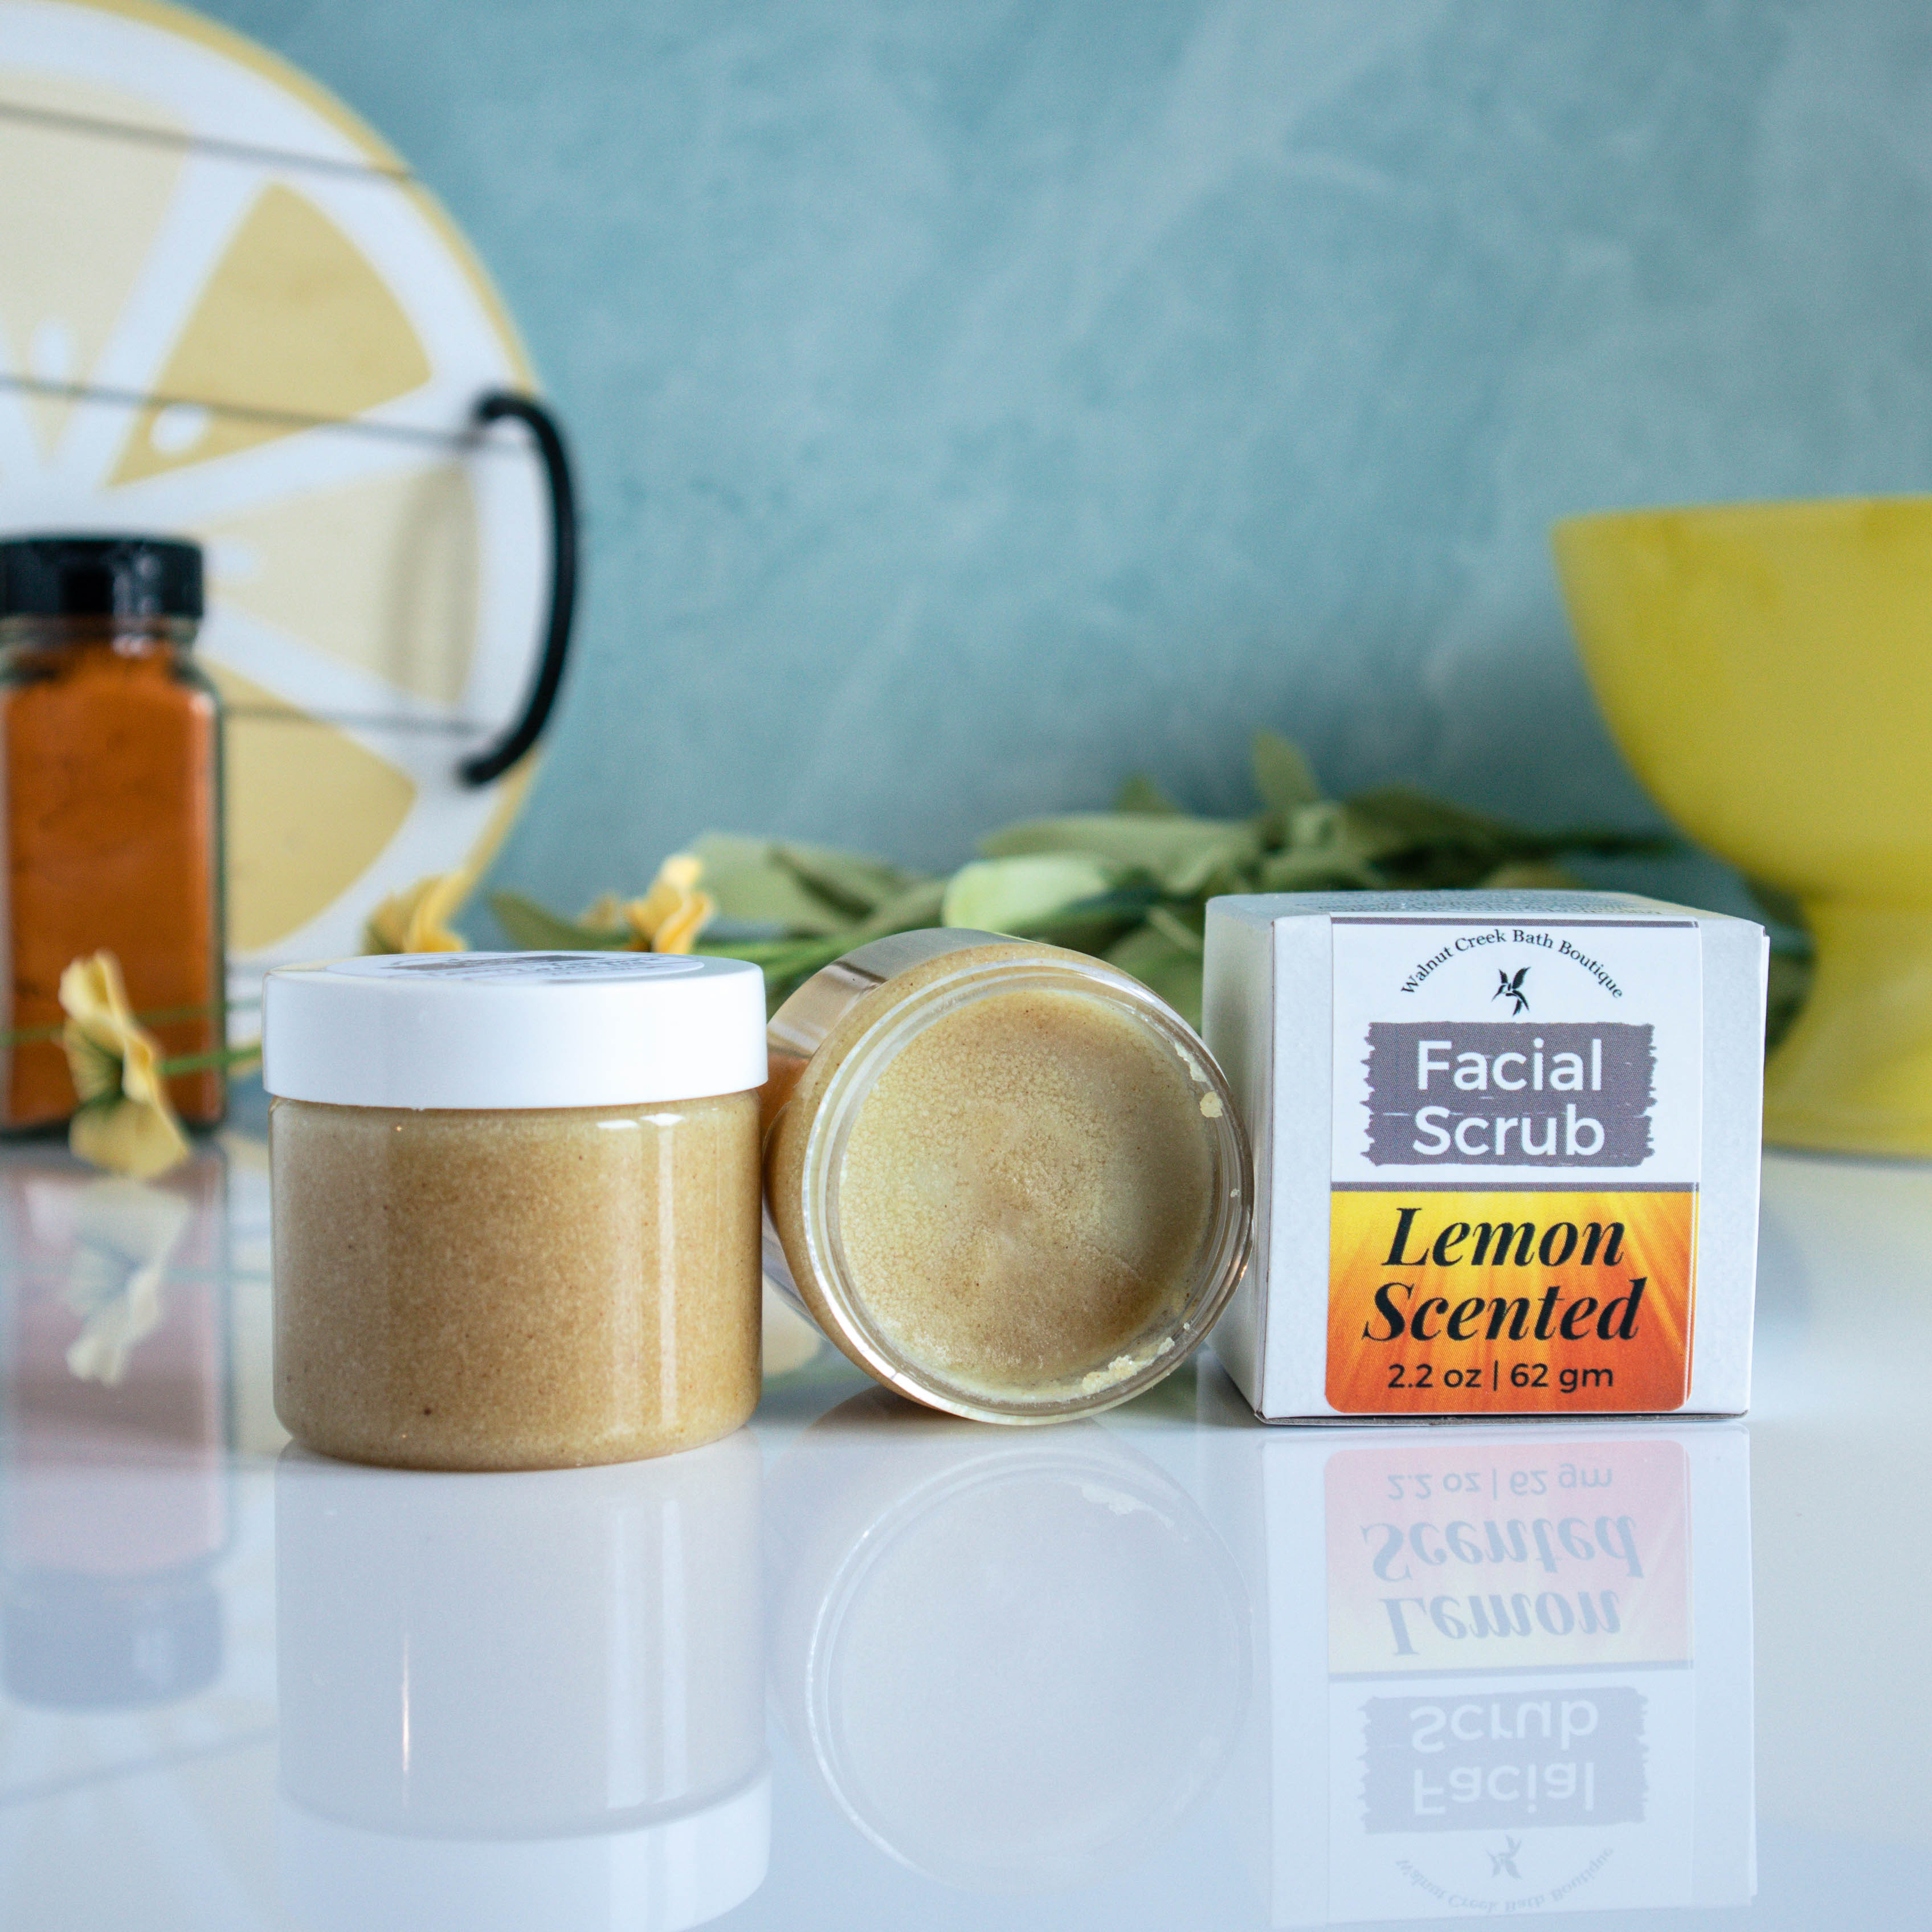 there is one jar with a white lid , next to that is an open jar on its side showing contents of face scrub. Next to that is the outer box with the label of facial scrub, lemon scented facing you. This is sitting on a shinny white  base. There is a blue/green background with a lemon tray off to the back left and a yellow bowl to the back right. There is a jar of turmeric in the background.